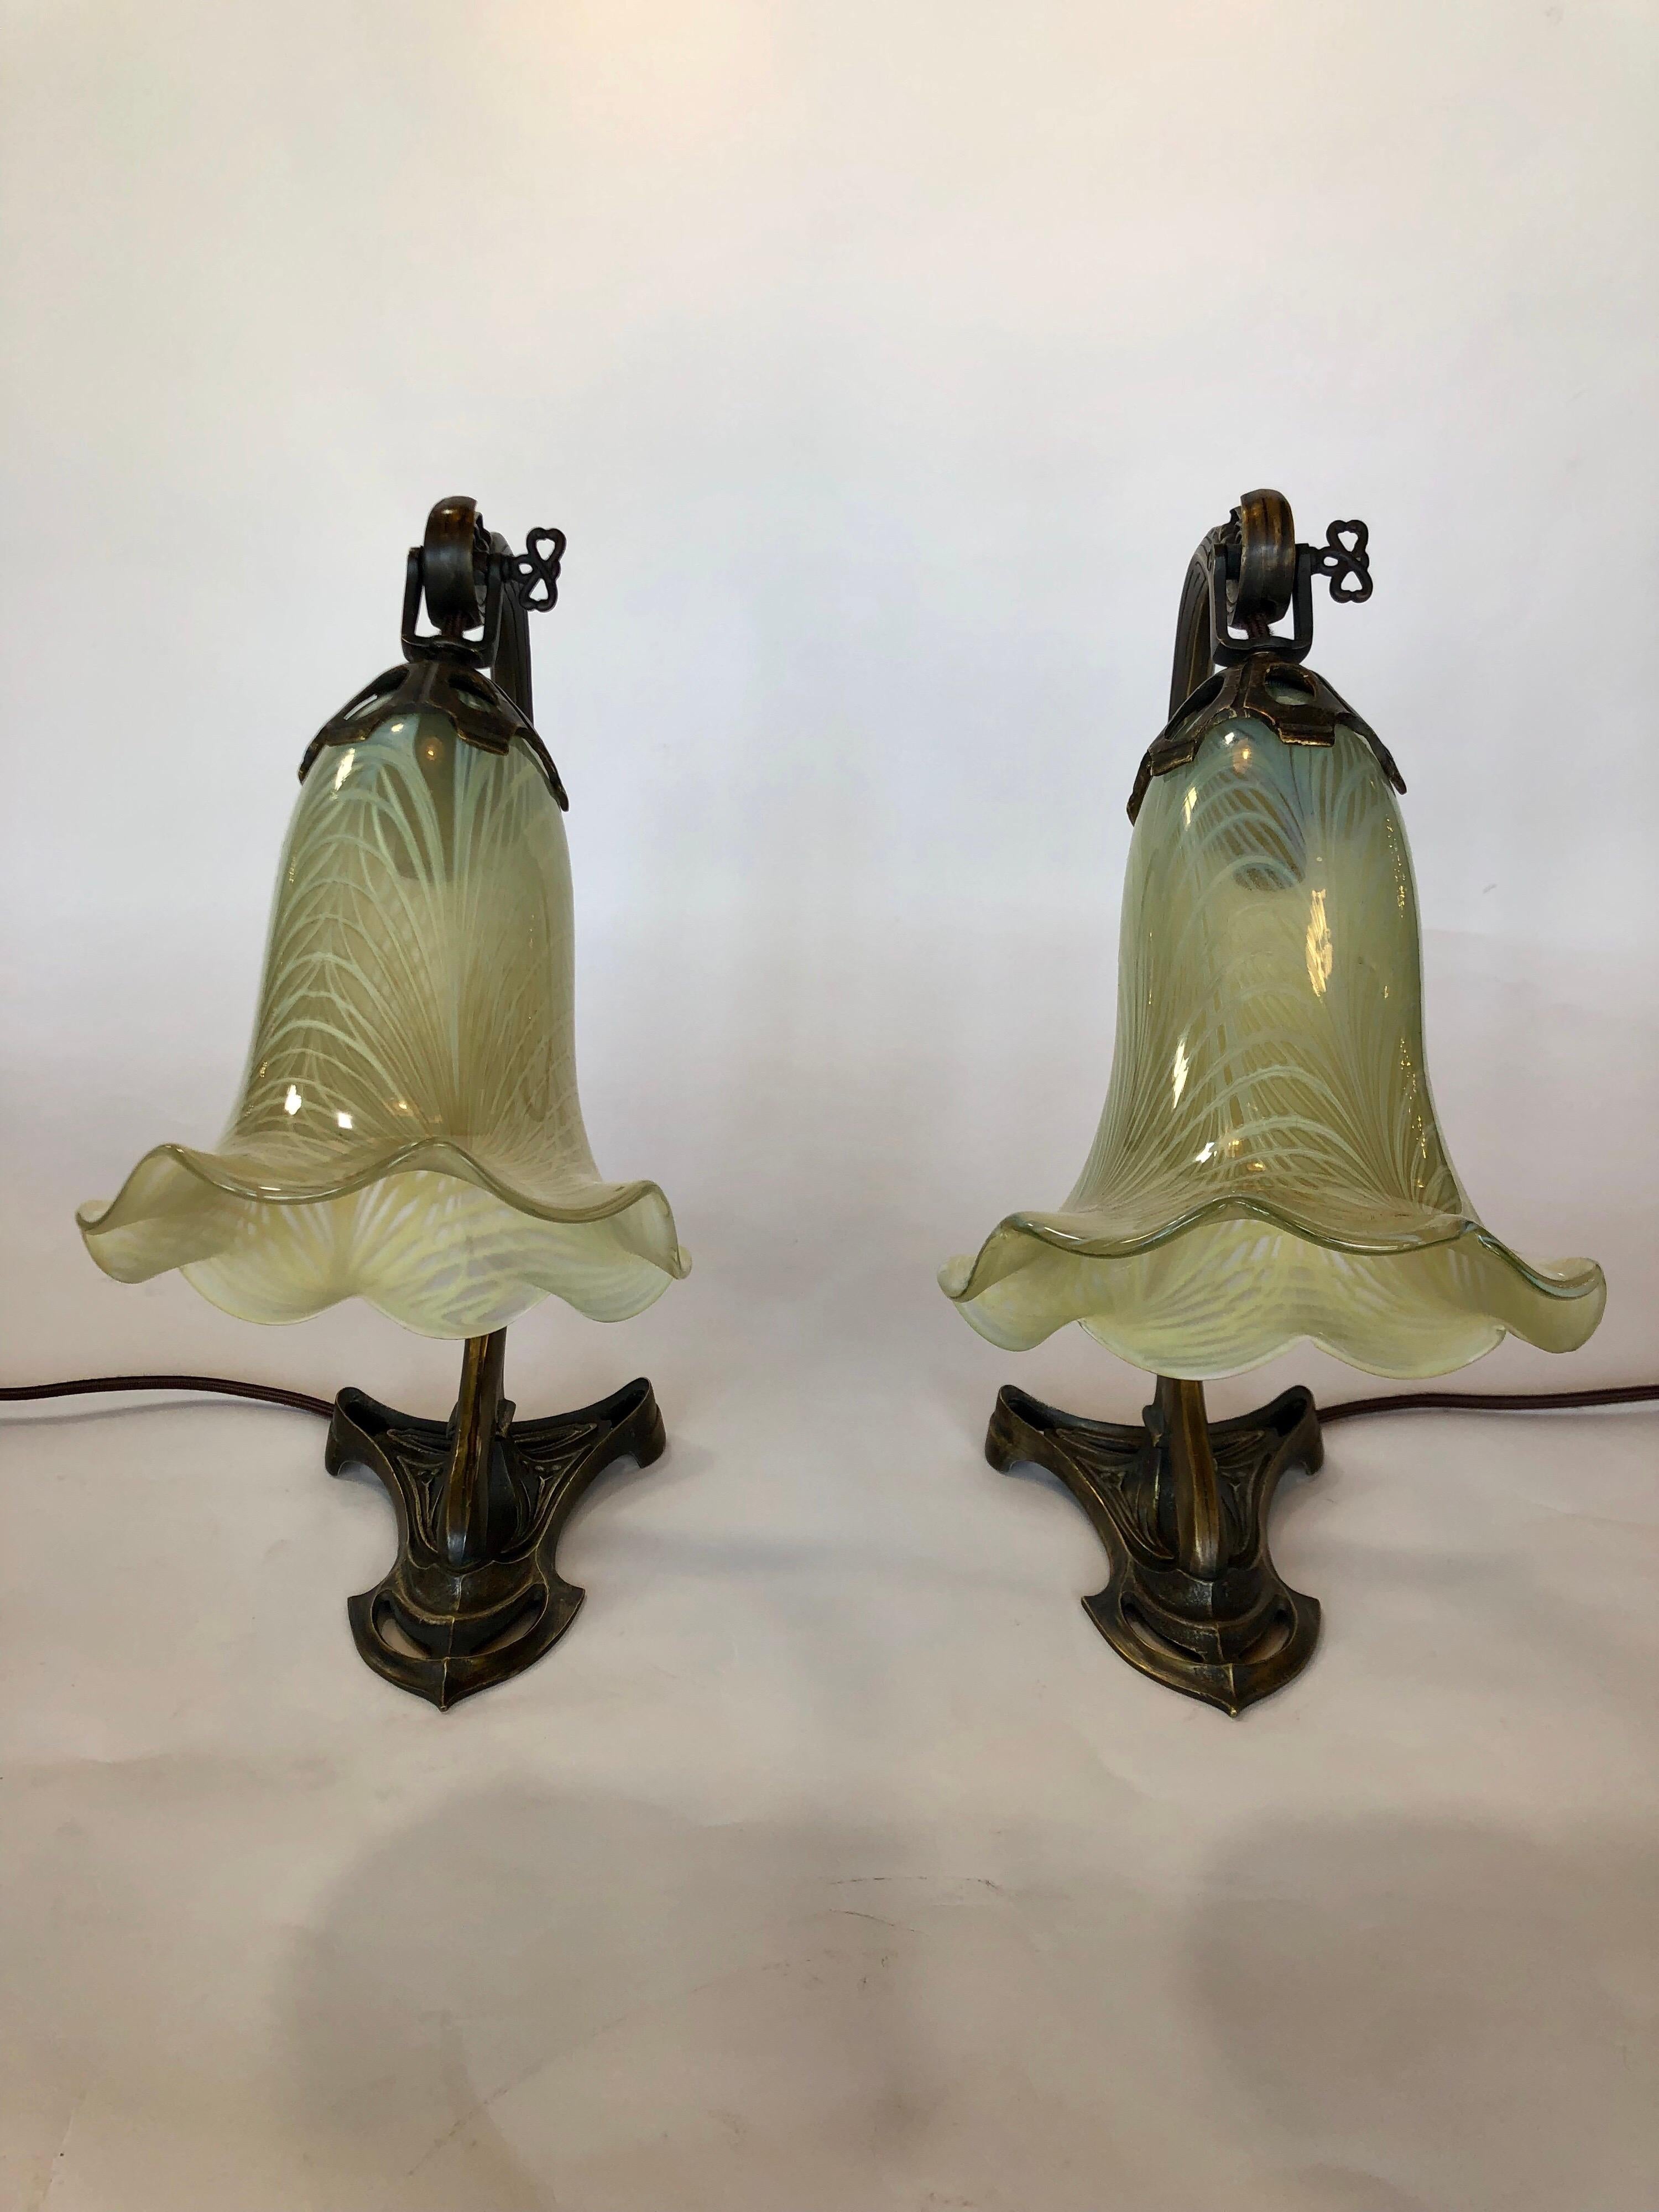 Pair of bronze Art Nouveau table lamps with glass shade.